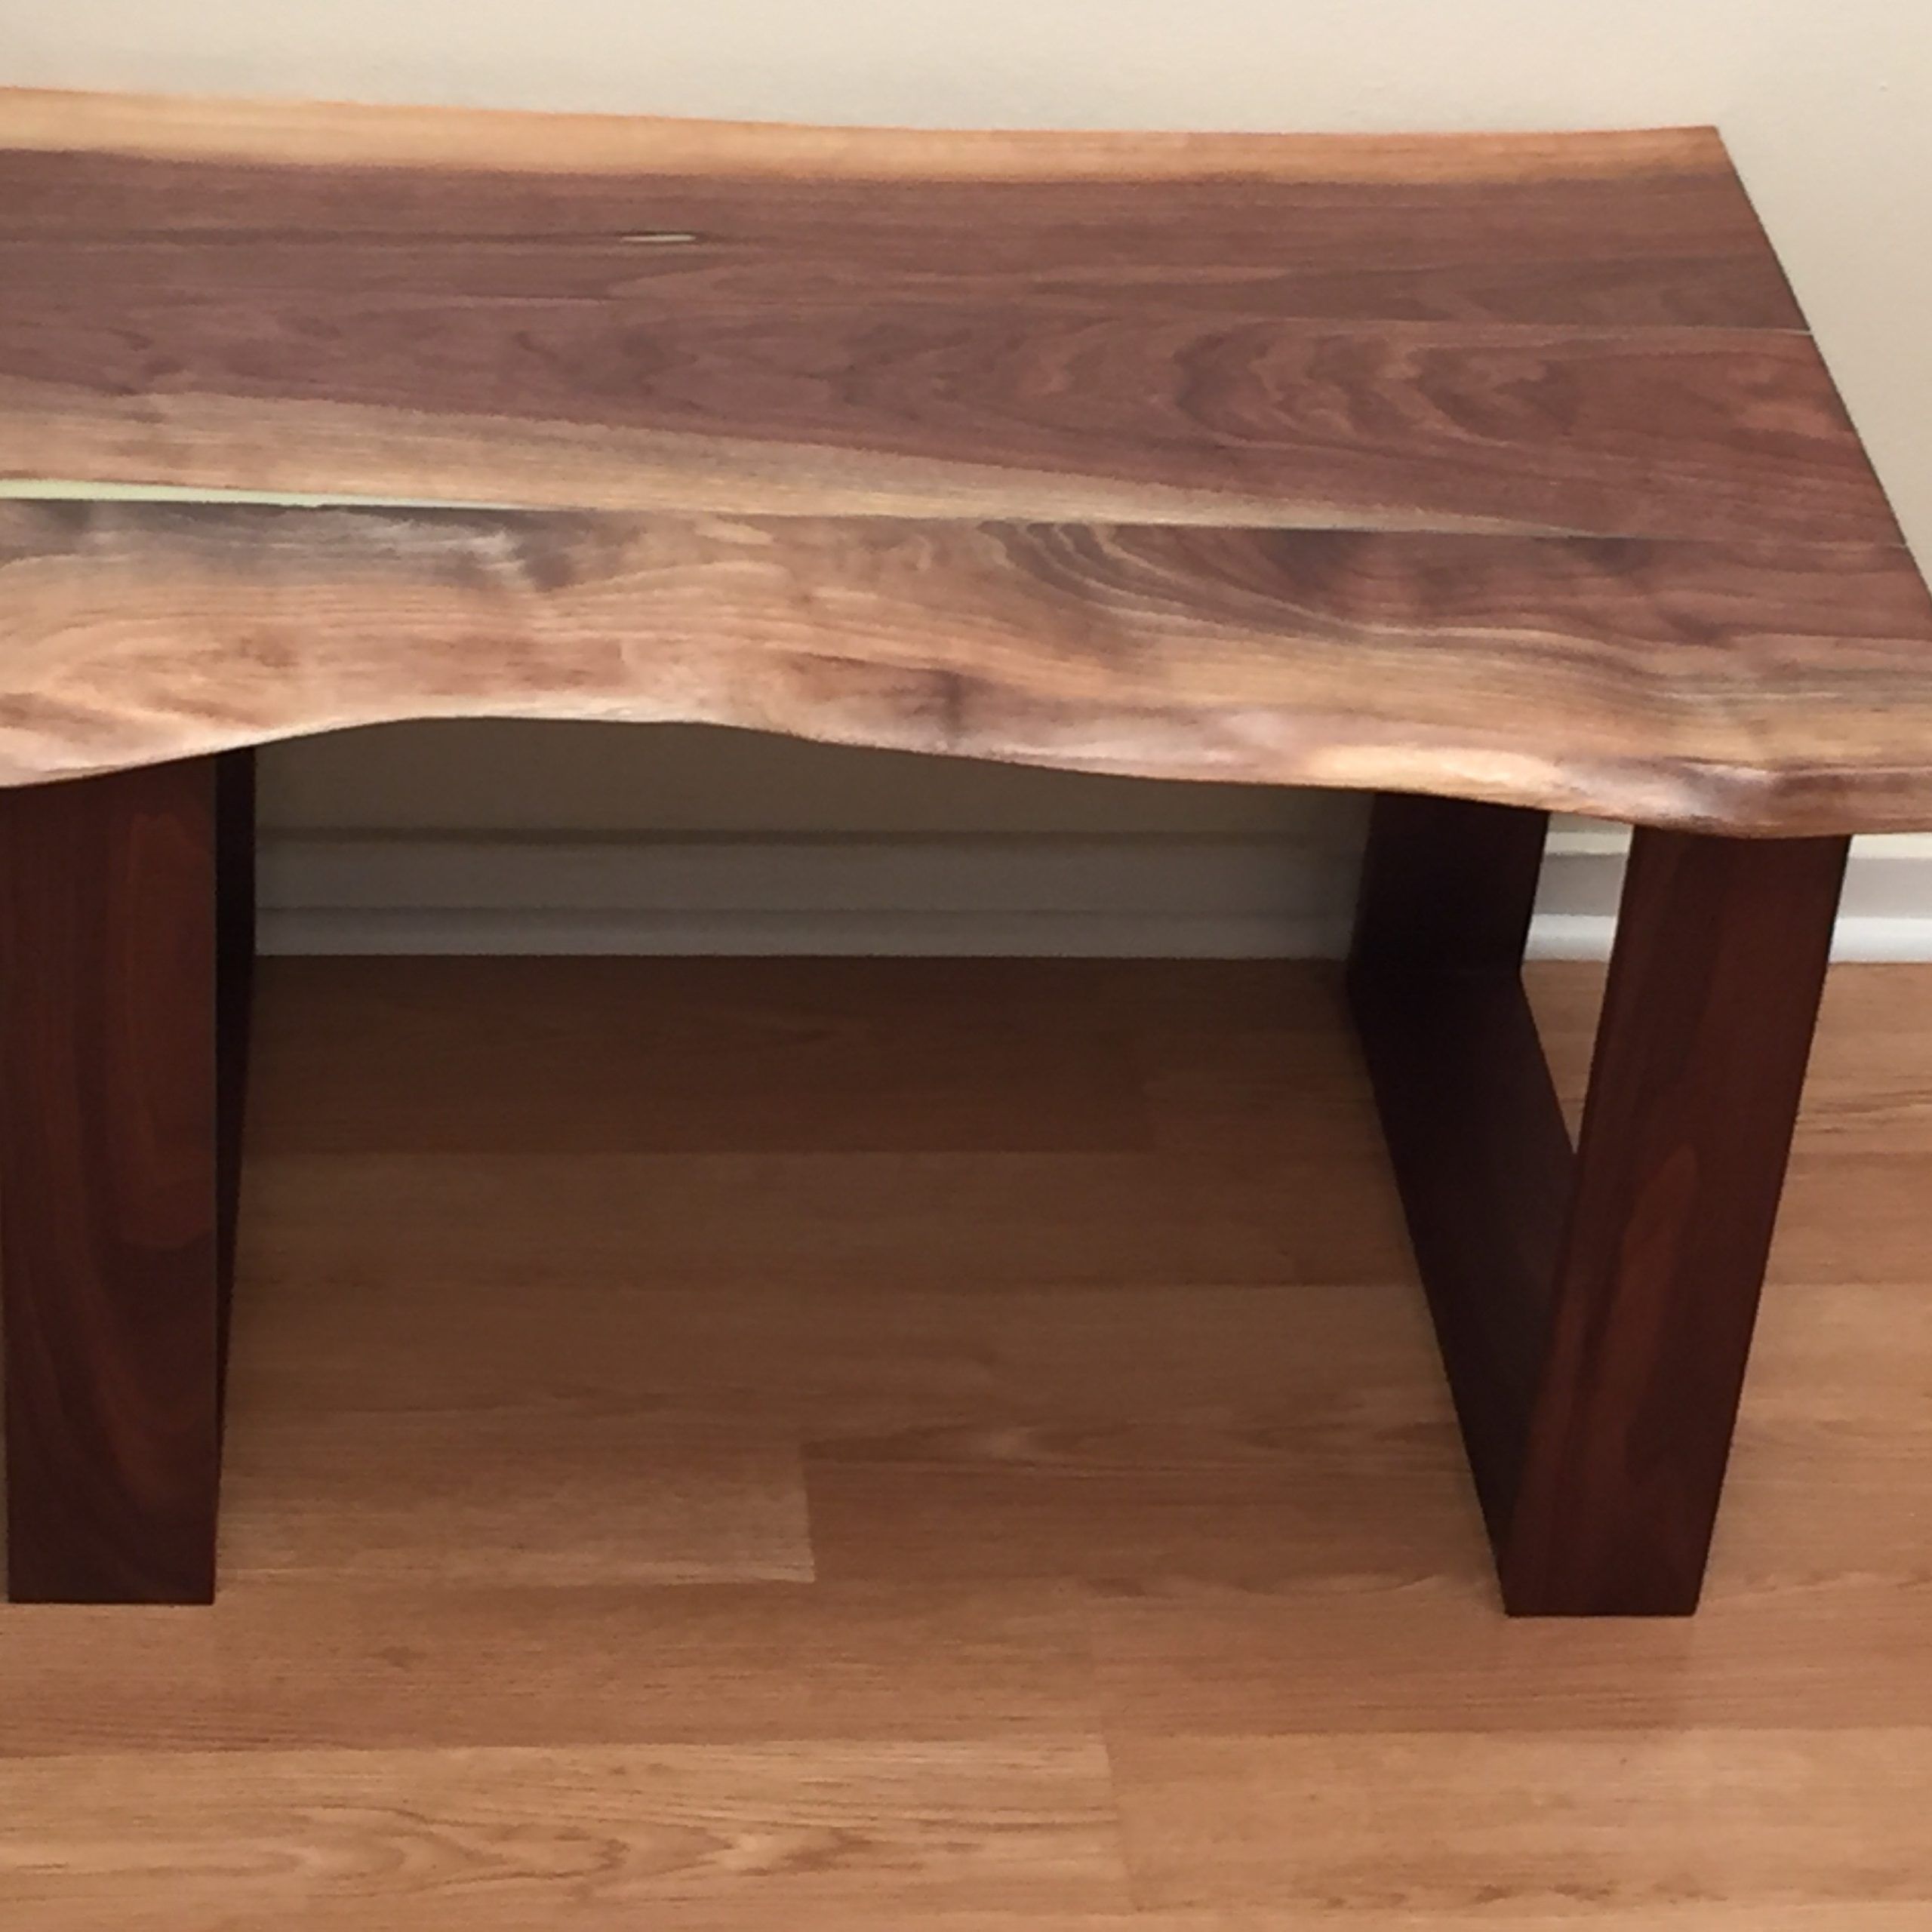 Cody Schweickhardt Walnut Coffee Table 4 6 With Regard To Coffee Tables For 4 6 People (View 4 of 20)